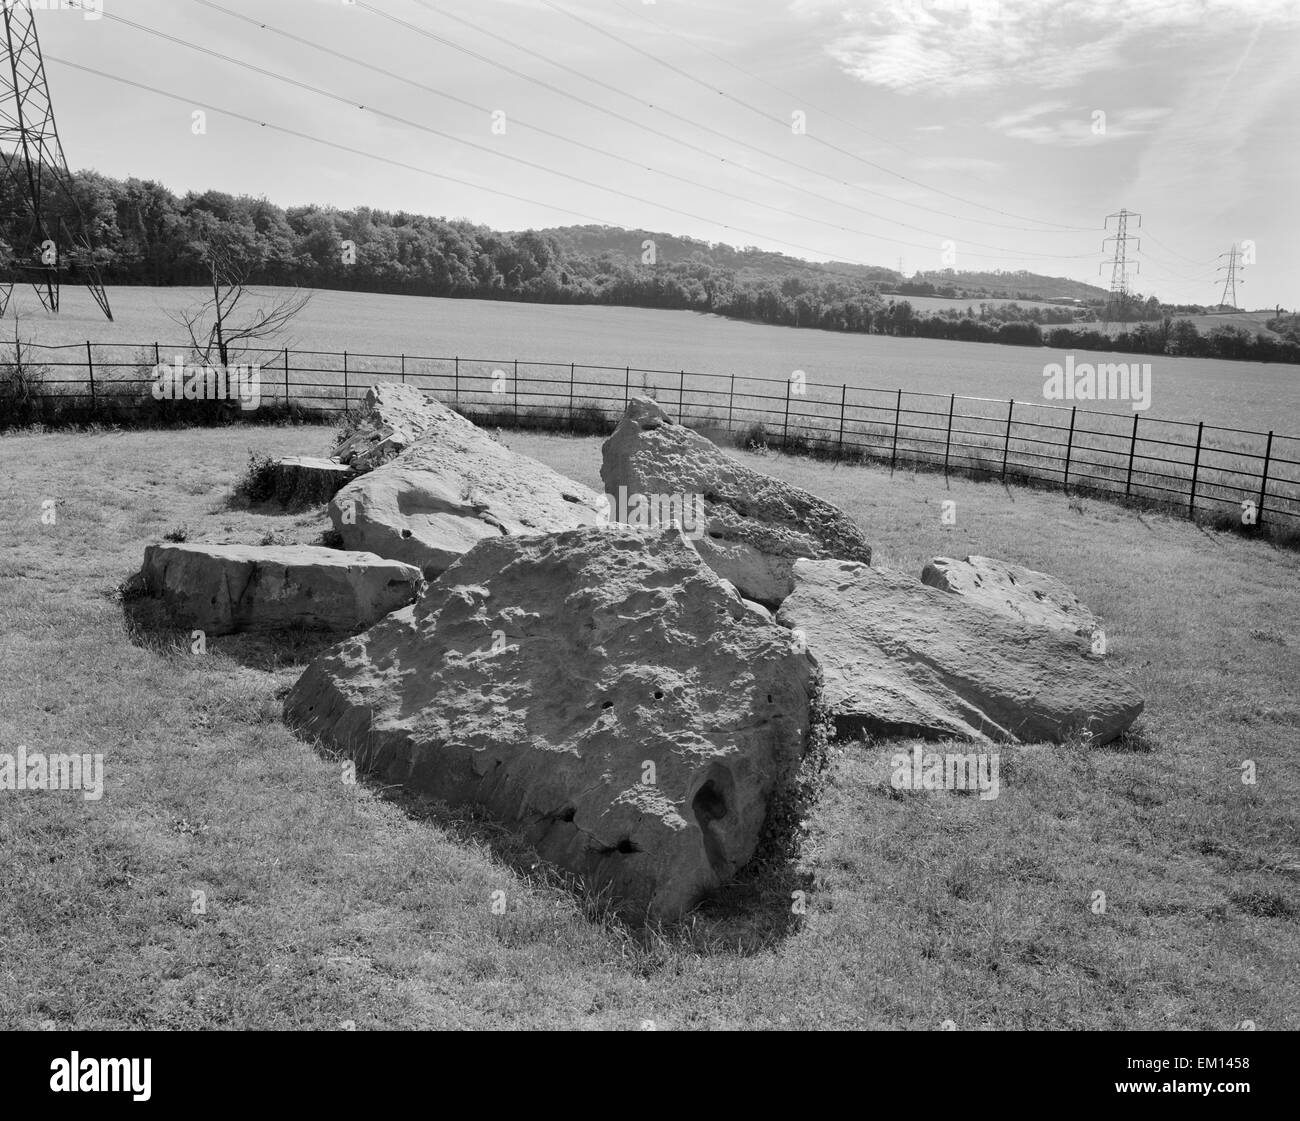 Lower Kits Coty, Medway Valley, Kent: sandstone slabs from the megalithic burial chamber & facade of a Neolithic long barrow destroyed in 1690. Stock Photo